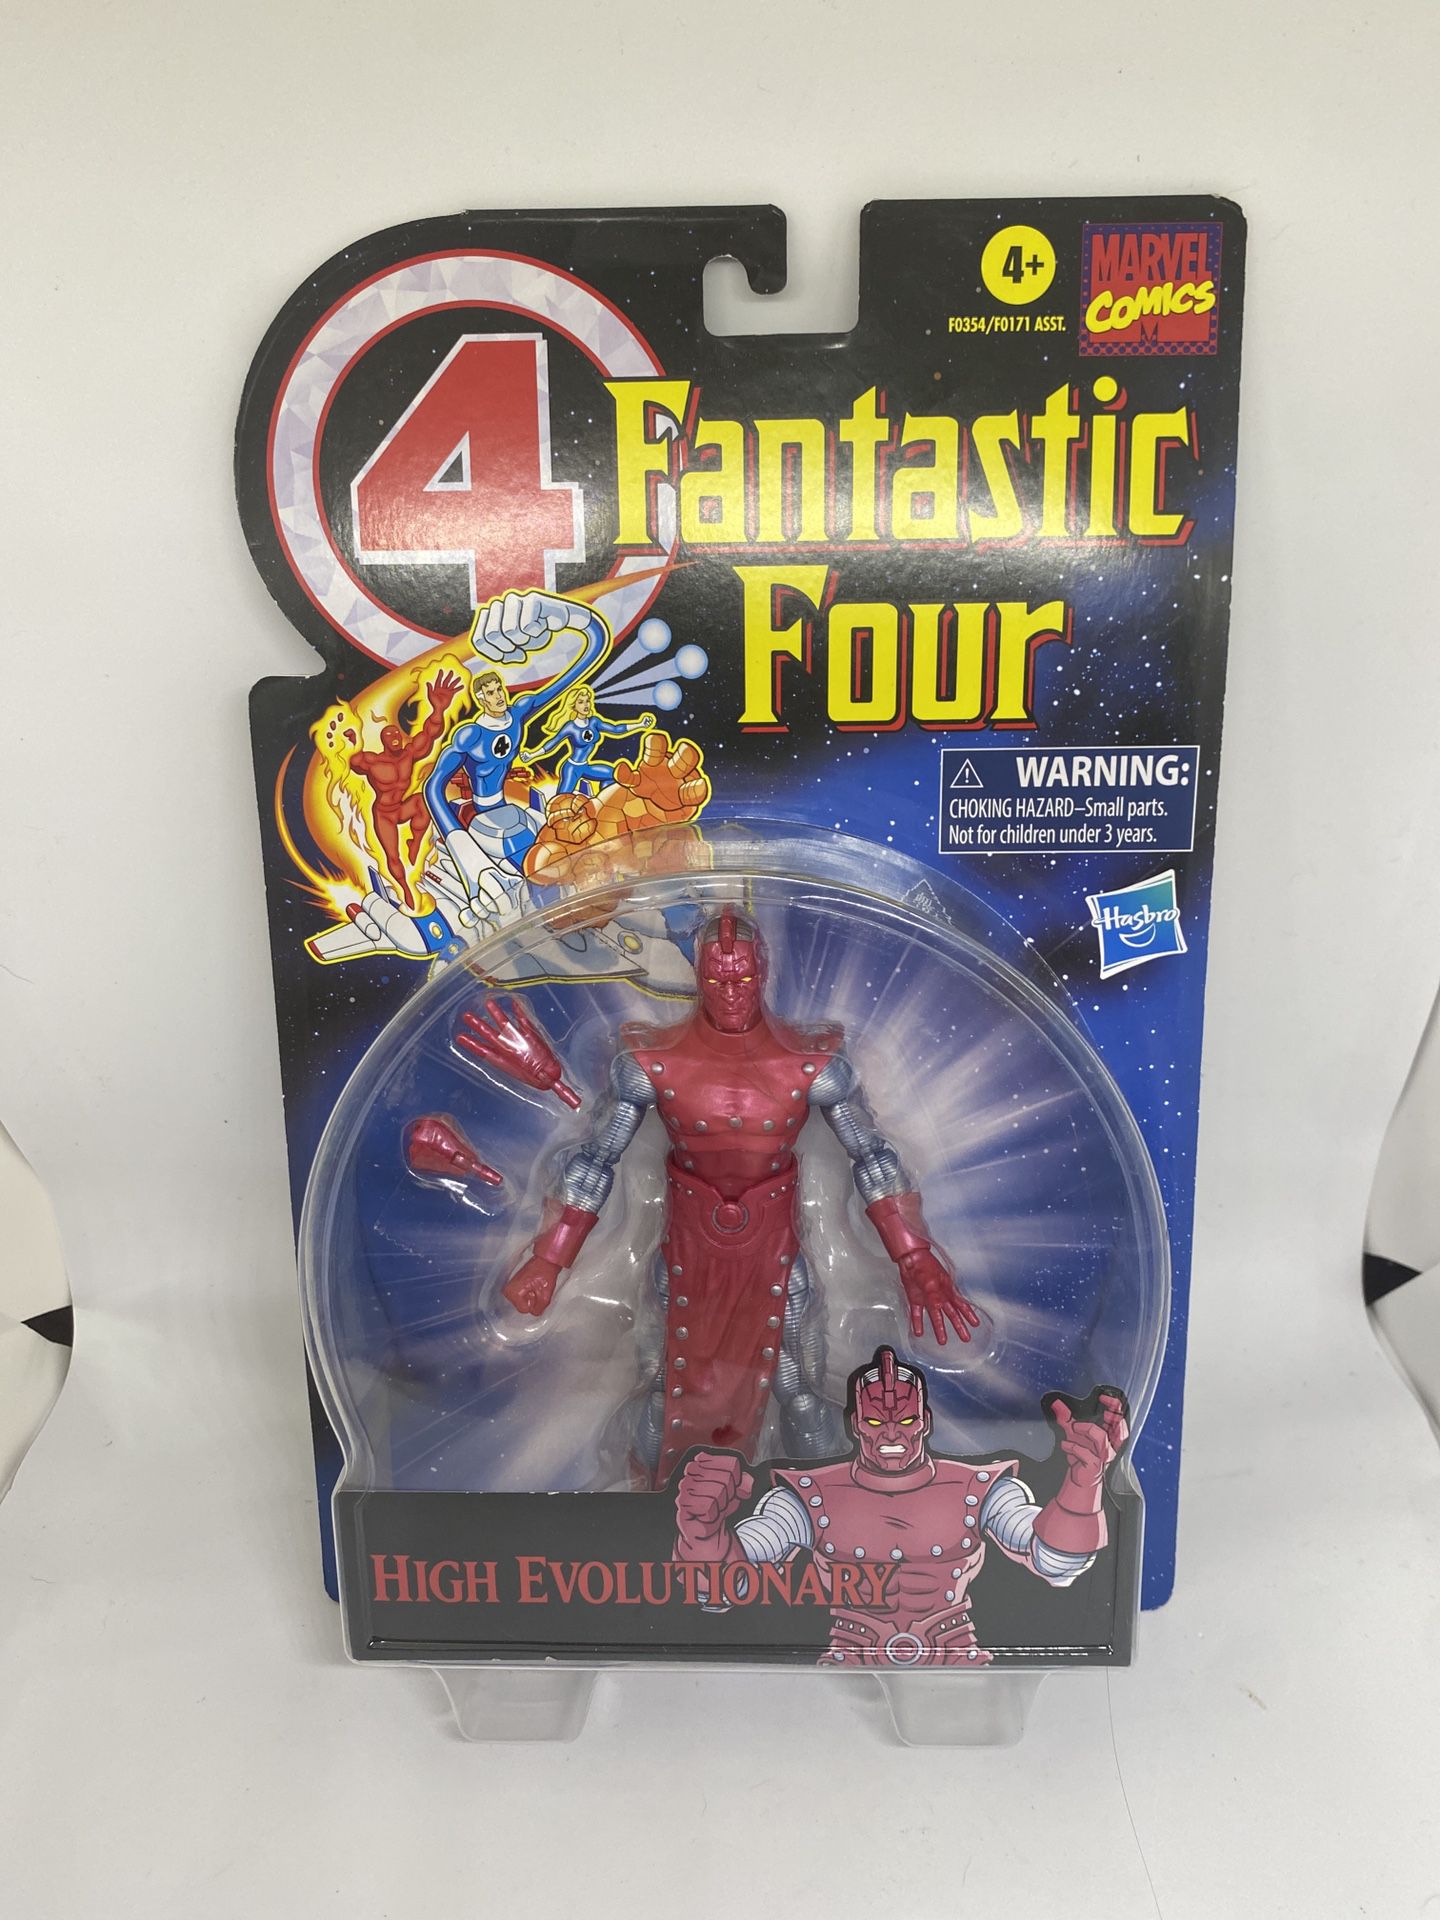 Fantastic four by Hasbro action figure